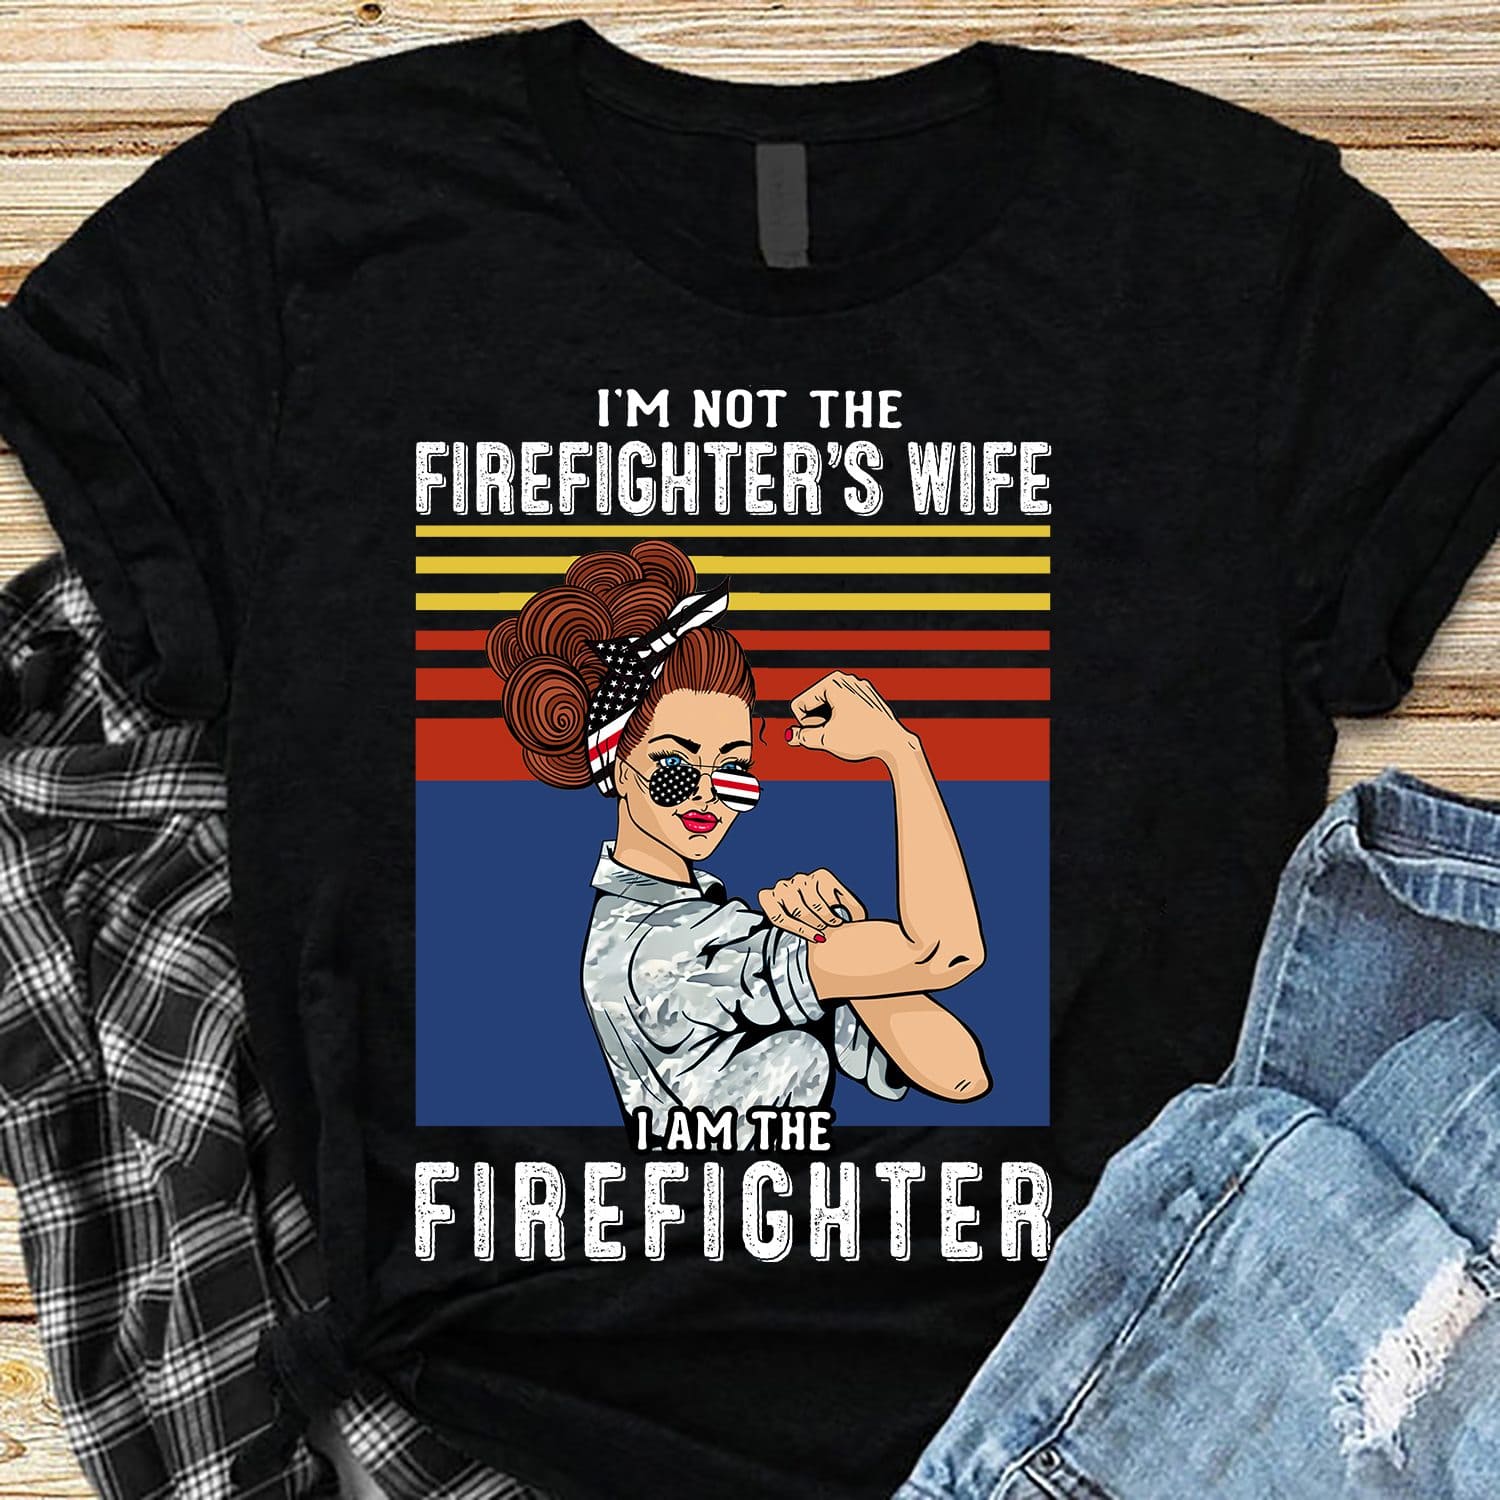 I'm not the firefighter's wife I am the firefighter - Strong woman, Woman the firefighter